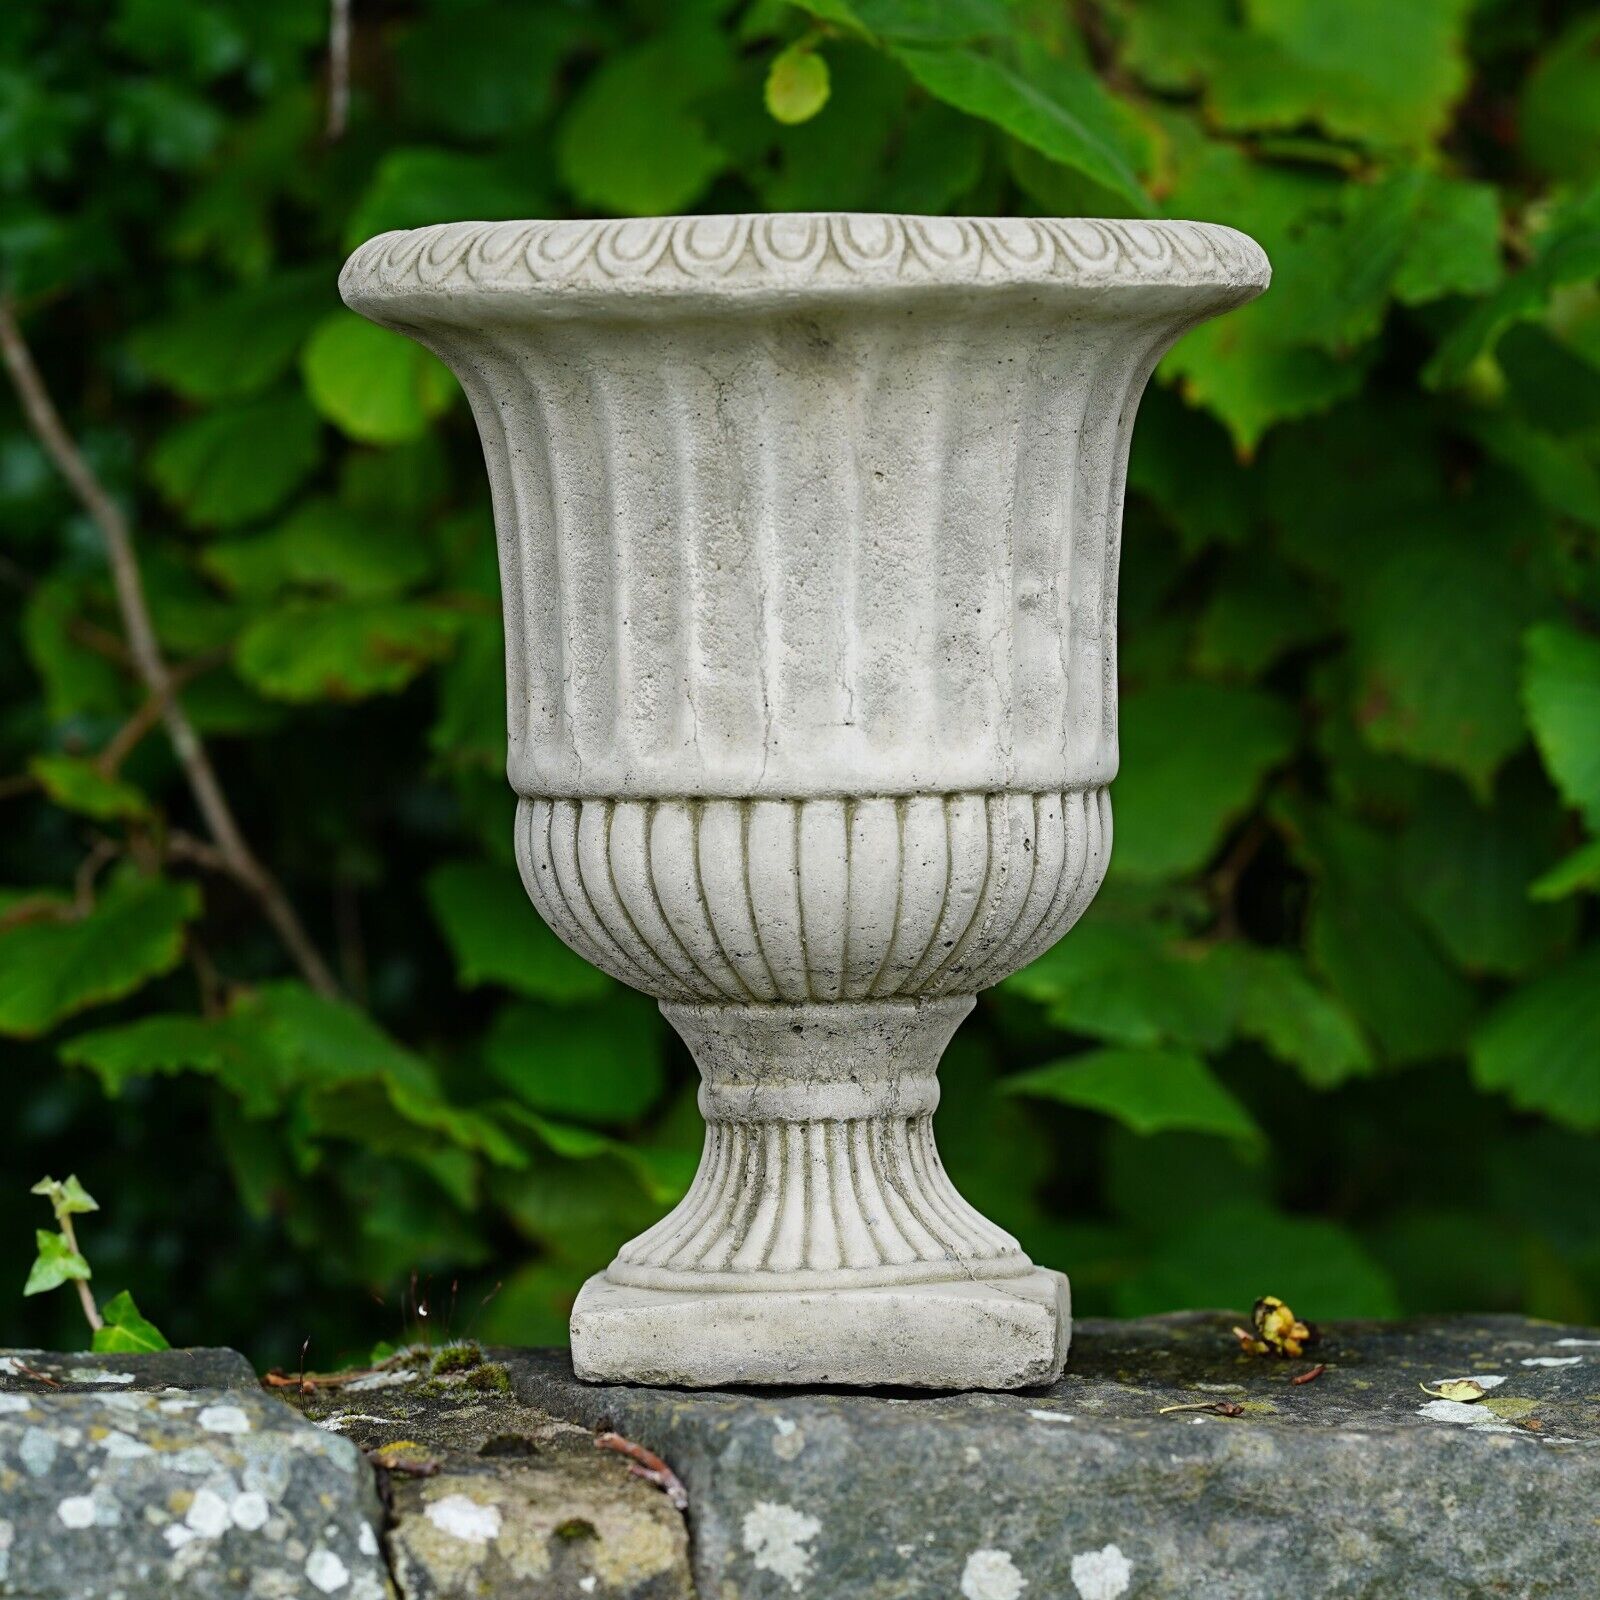 A Victorian style stone urn with intricate pattern design. Situated on the garden wall of a British garden with green foliage in the background